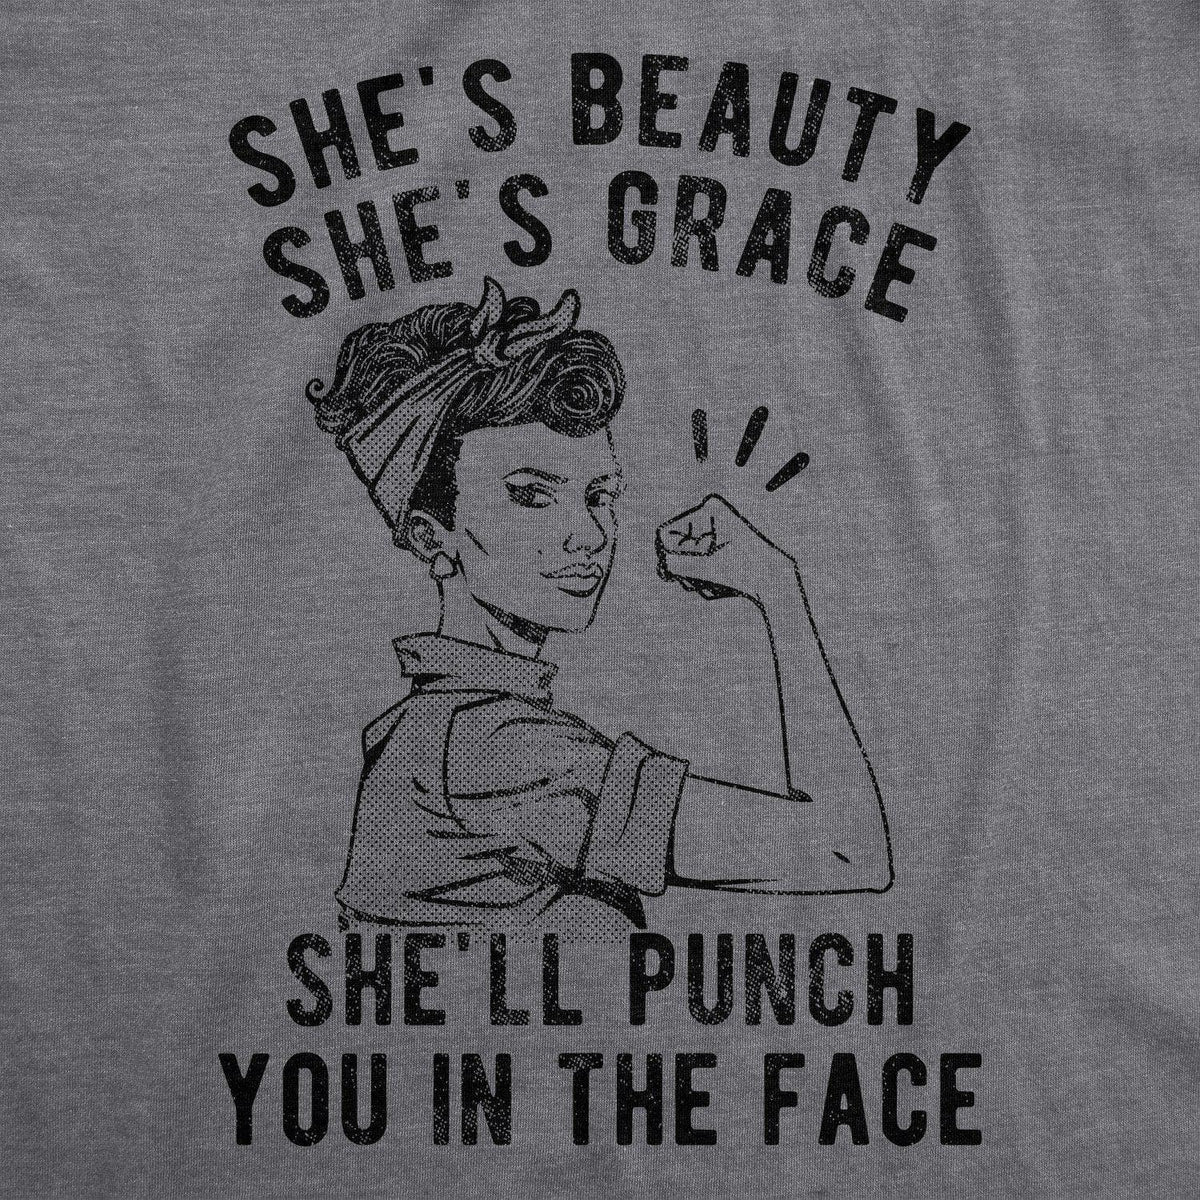 She&#39;s Beauty She&#39;s Grace She&#39;ll Punch You In The Face Women&#39;s Tshirt - Crazy Dog T-Shirts